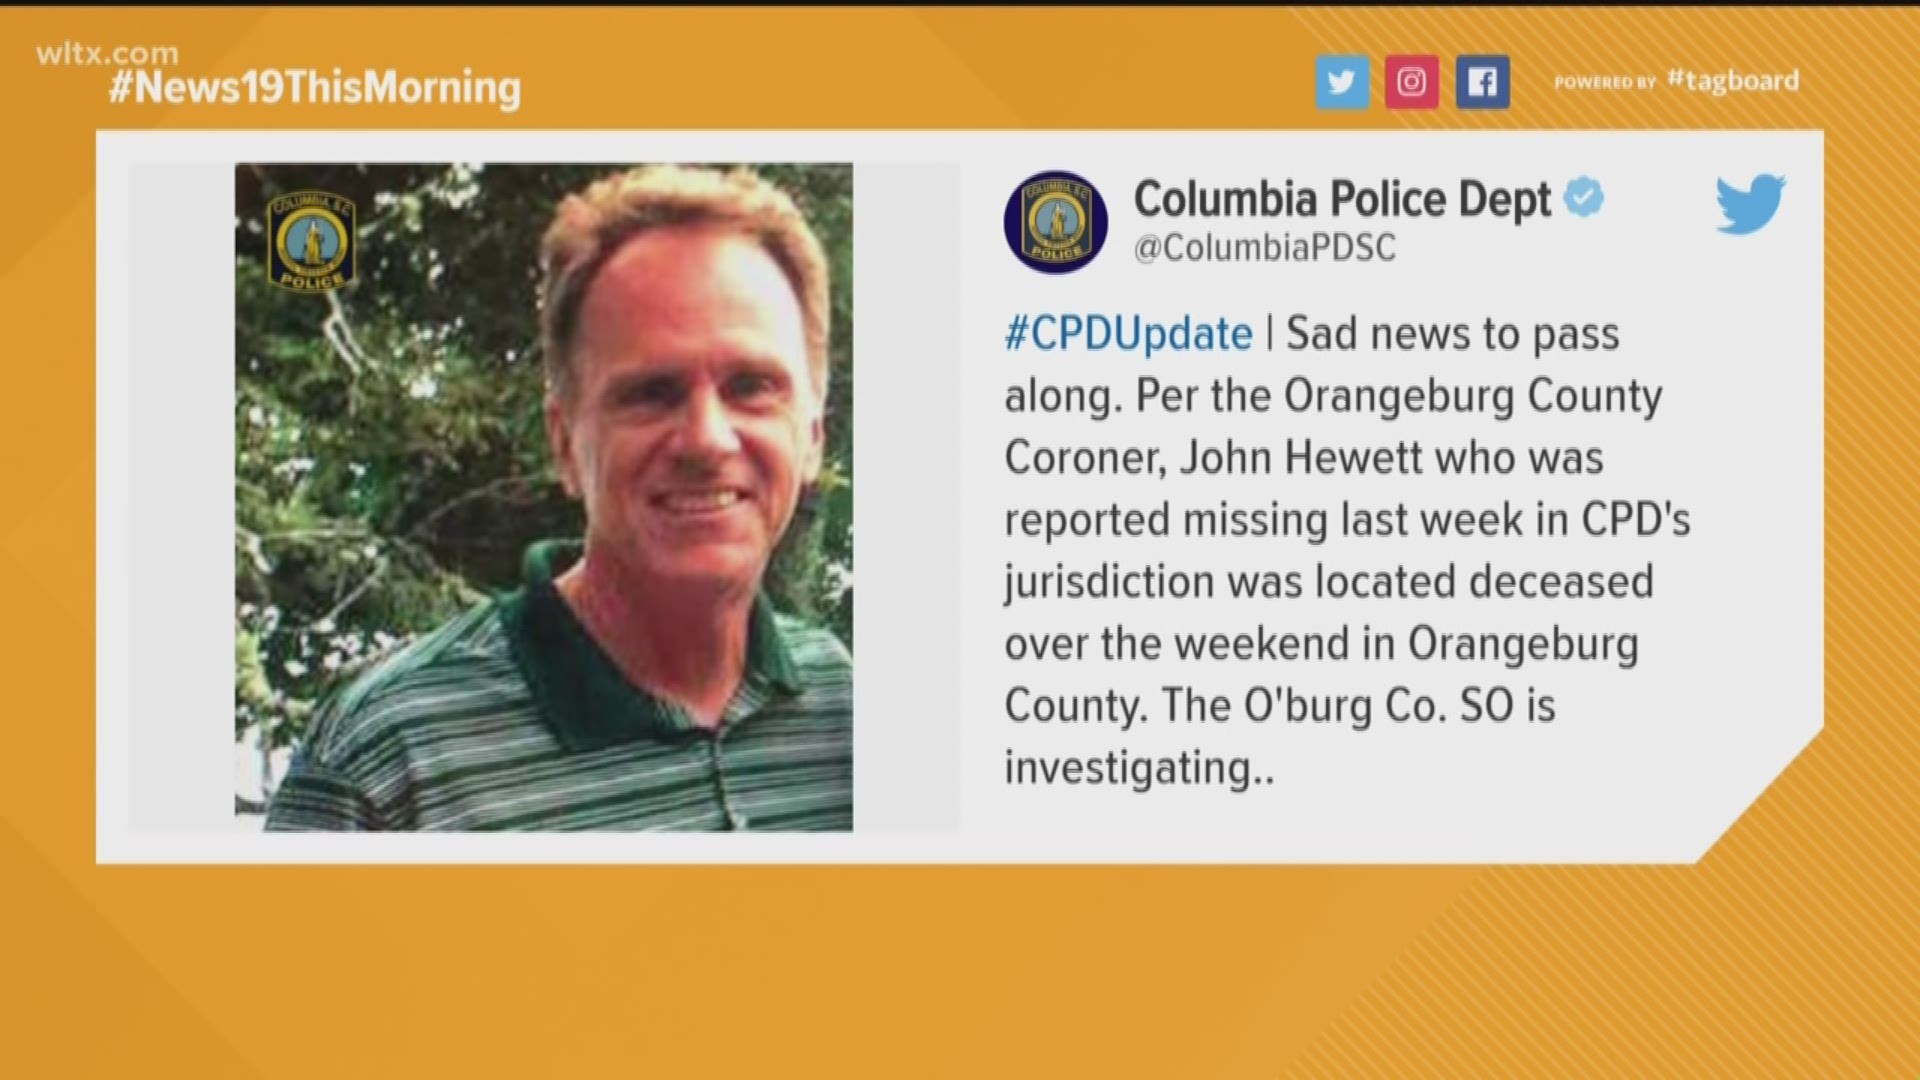 A 62-year-old Columbia man missing since last week has been found dead in Orangeburg County, according to police.